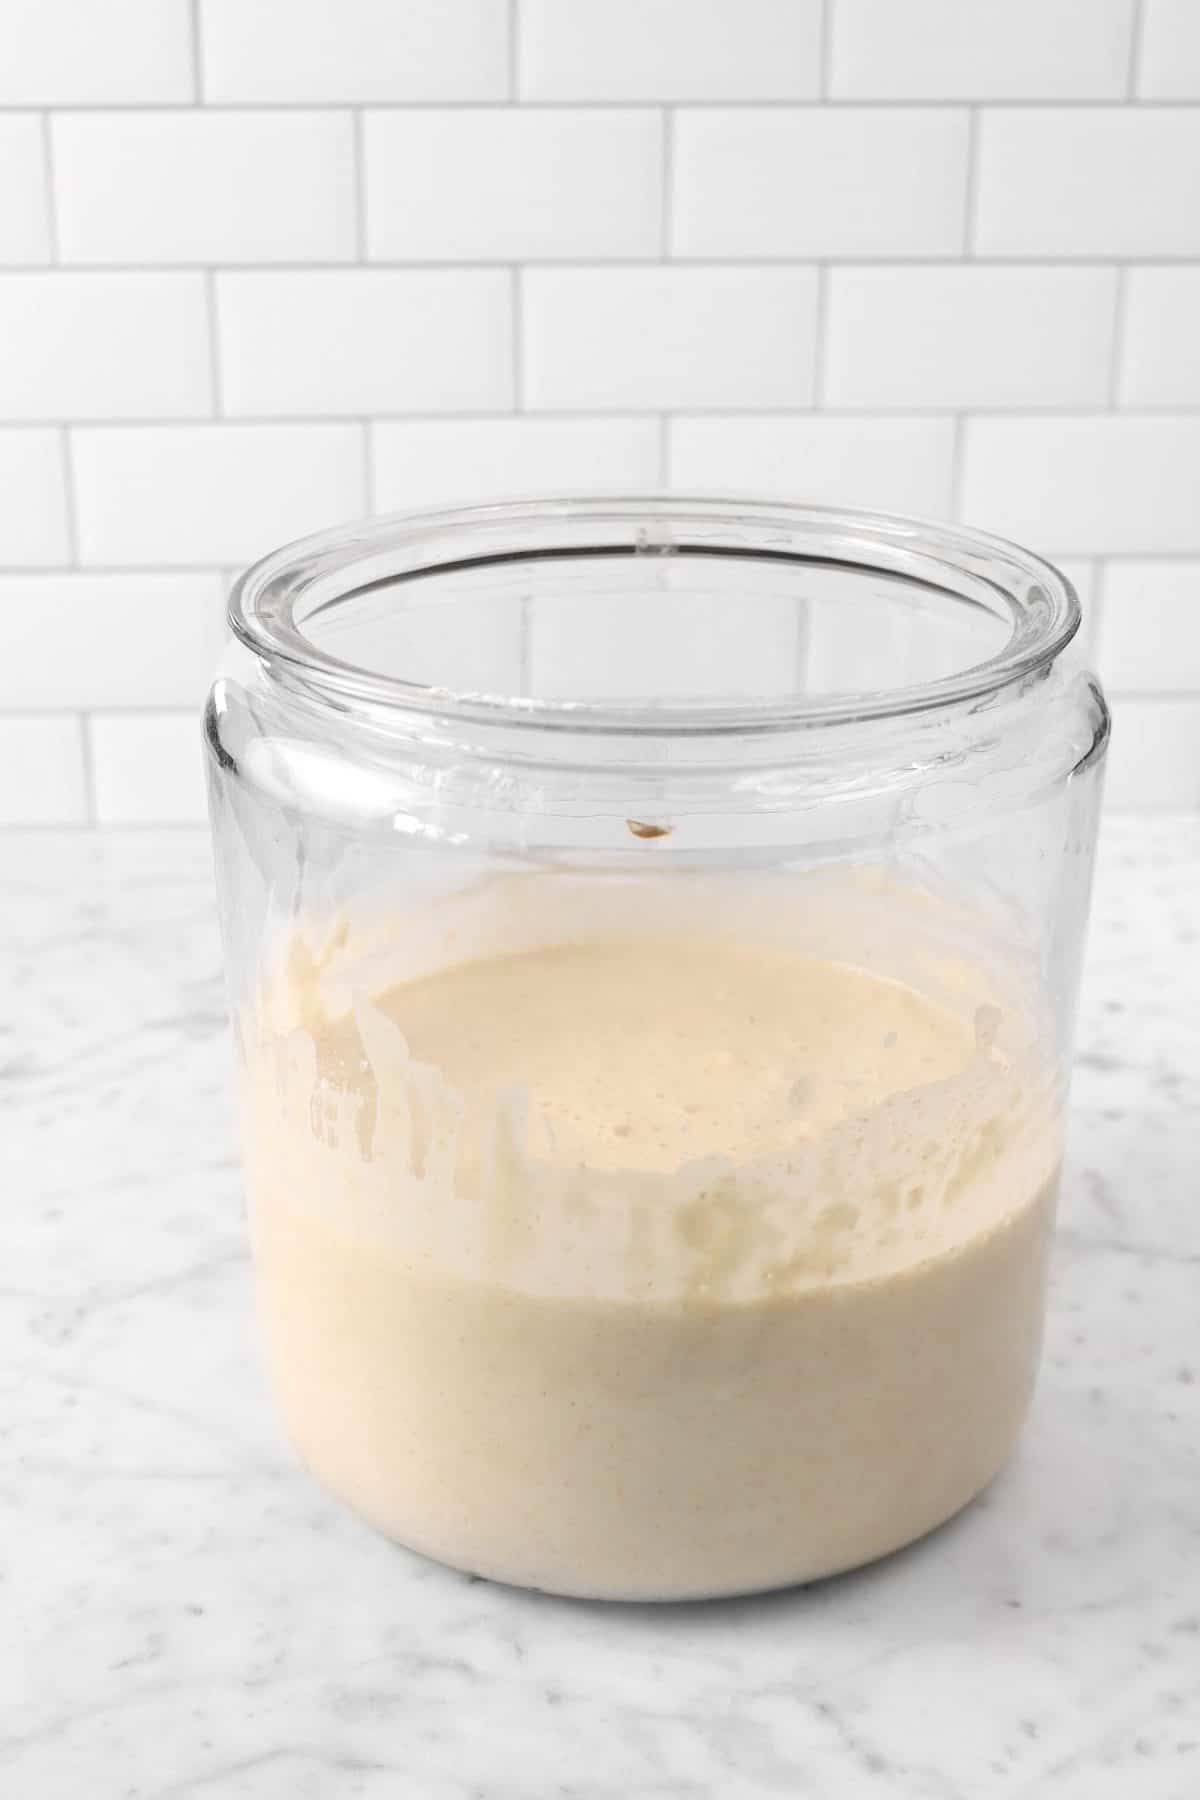 sourdough starter in a glass jar on a marble counter